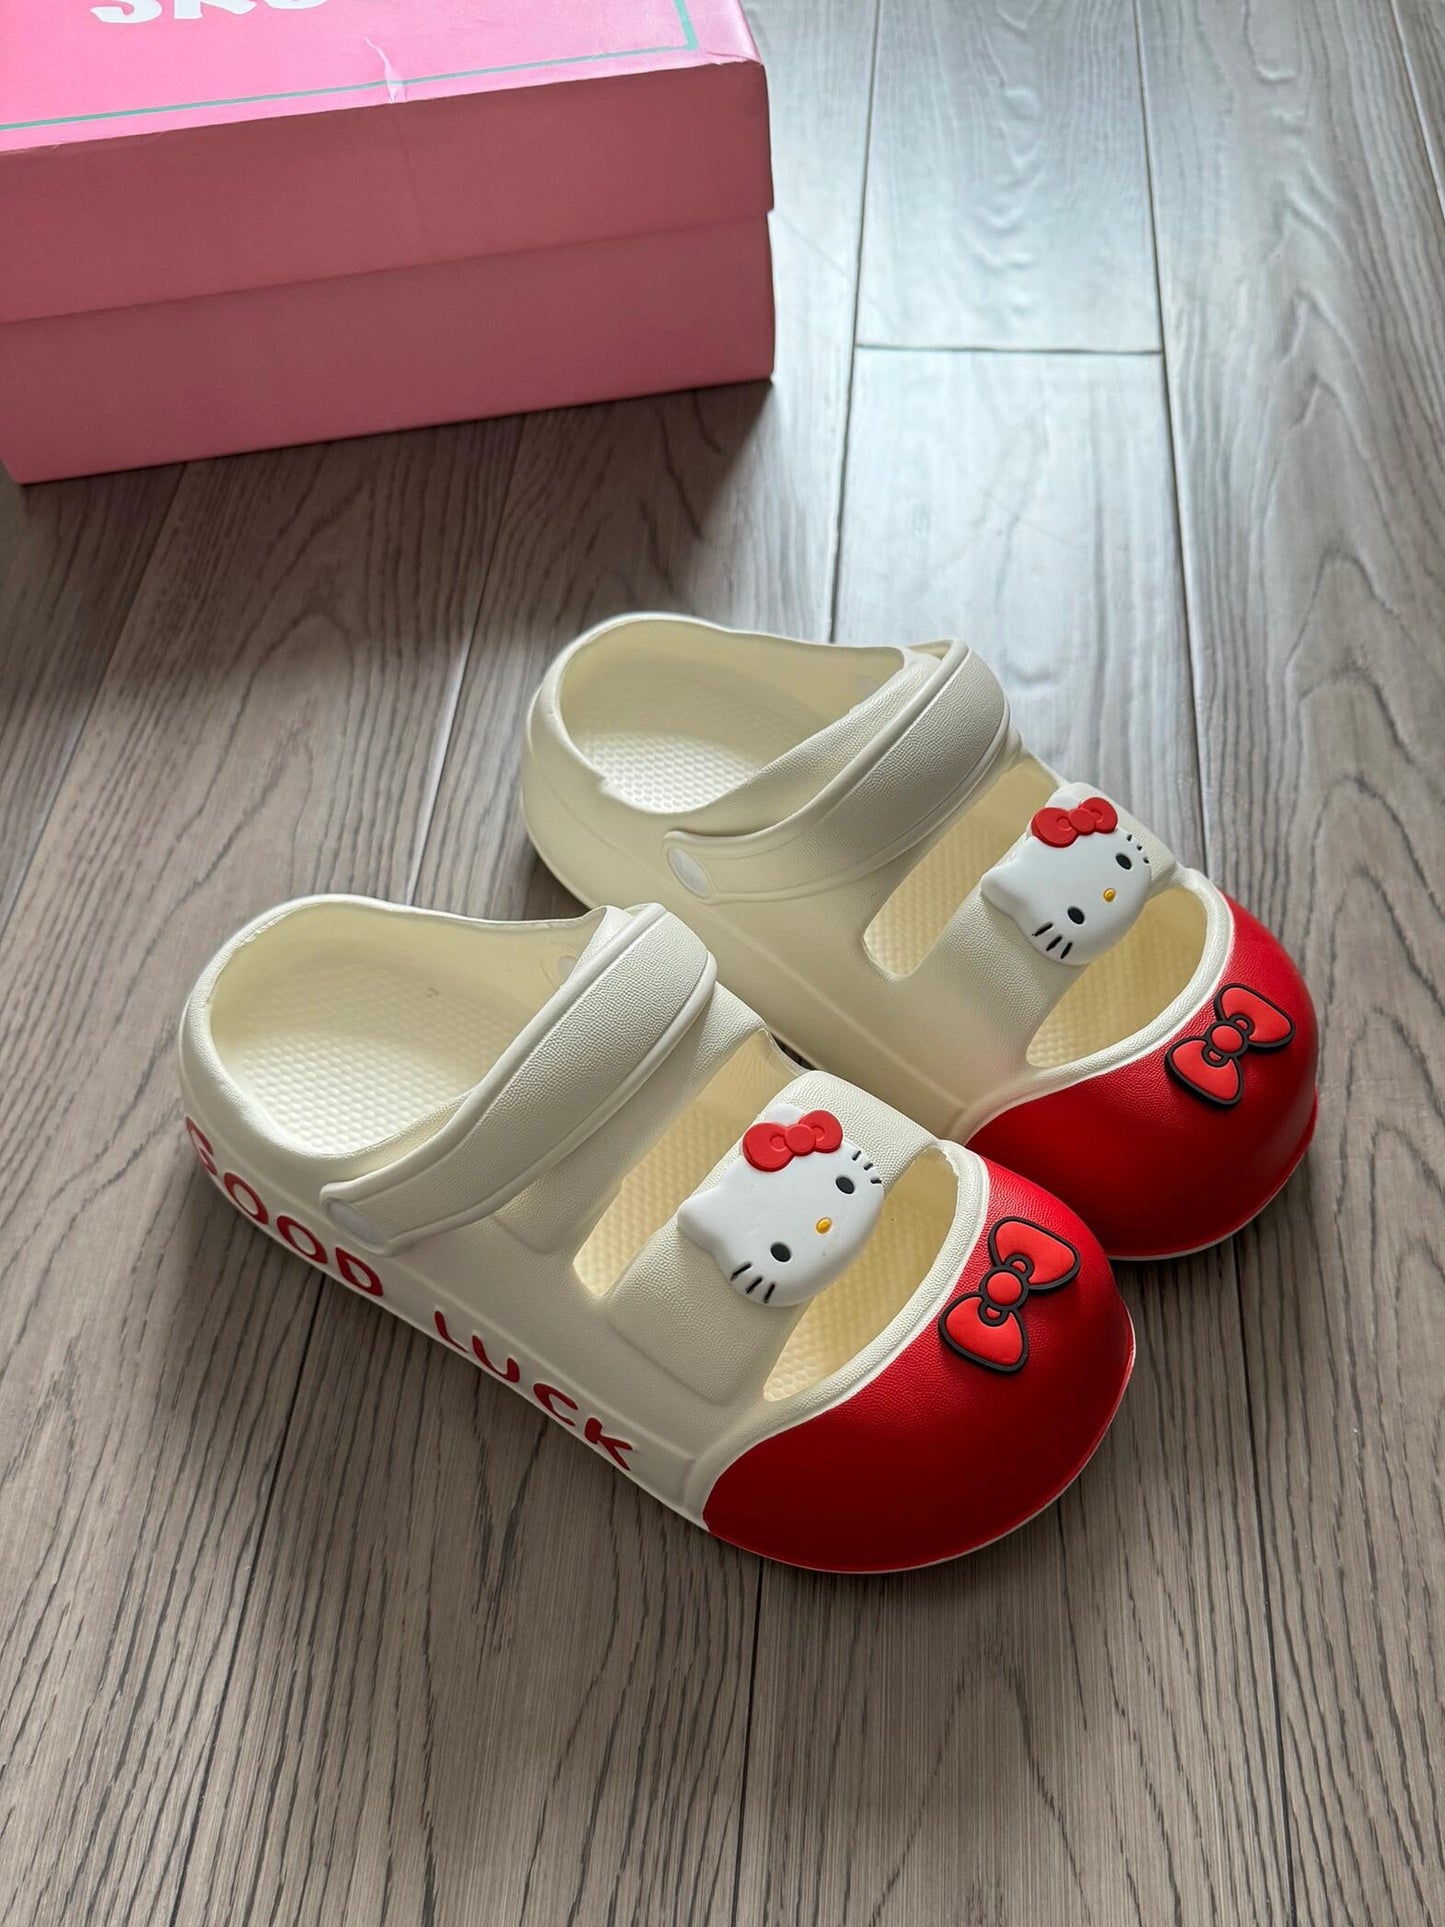 Hello Kitty Slip on Water Shoes Casual Summer for Girls